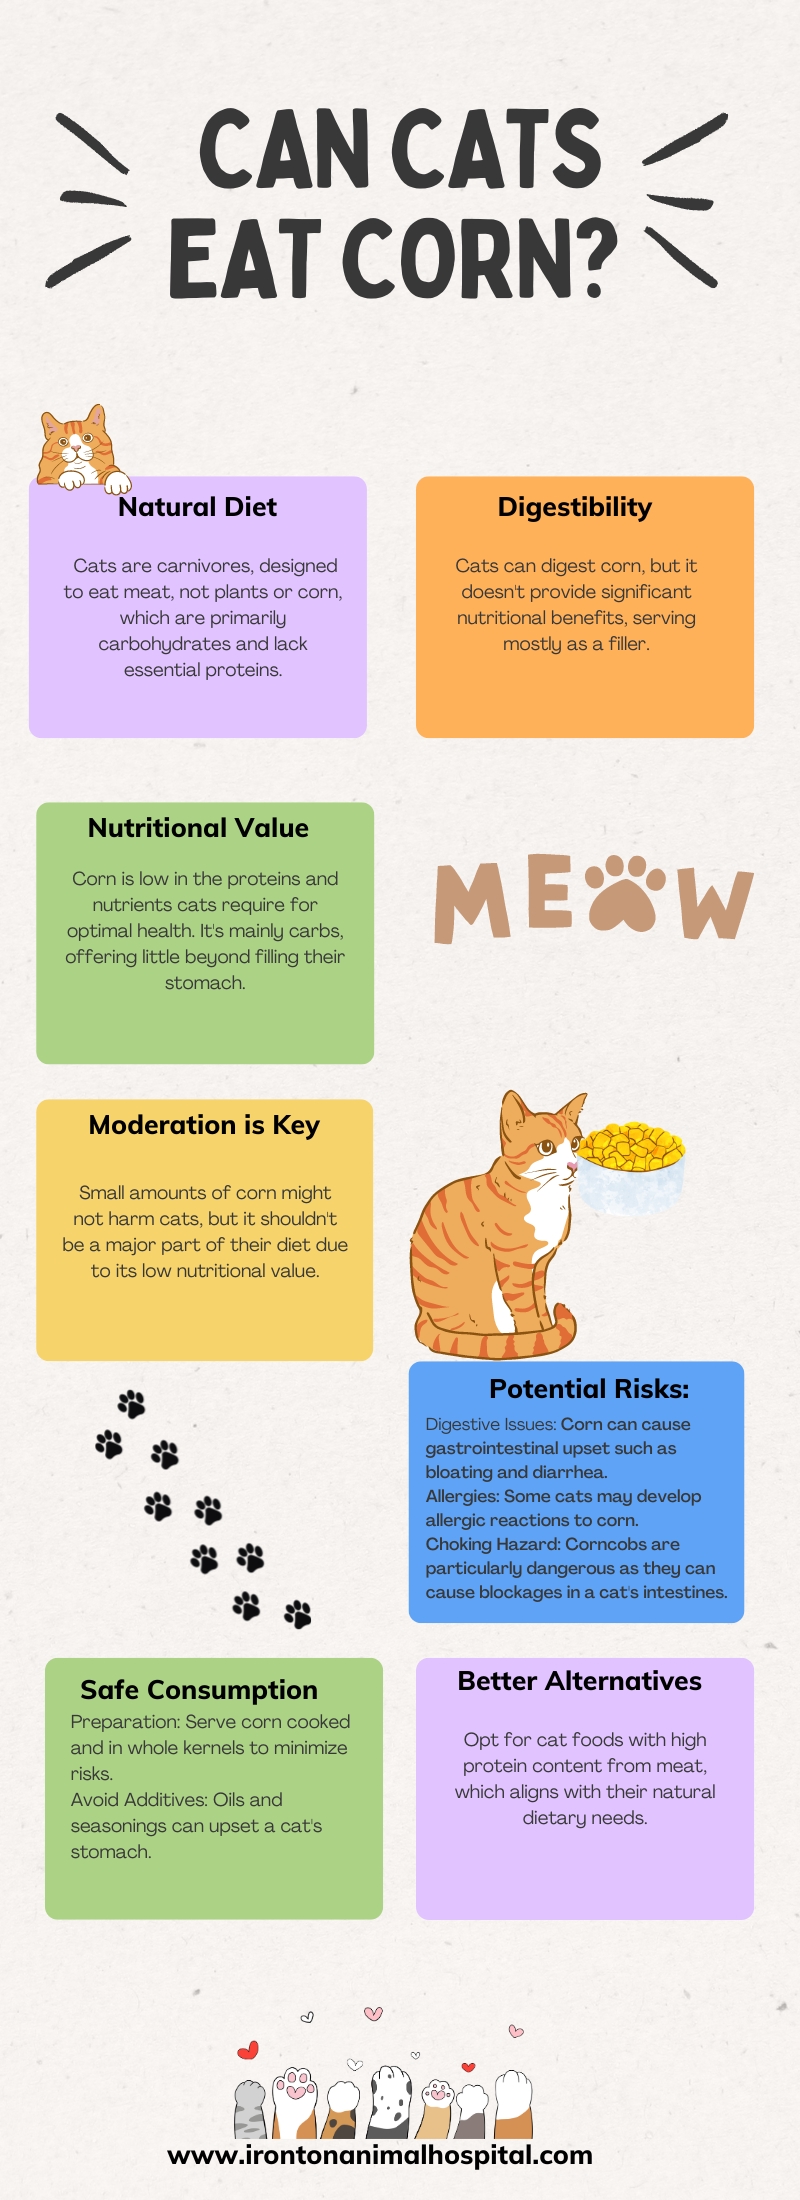 Can Cats Eat Corn infographic